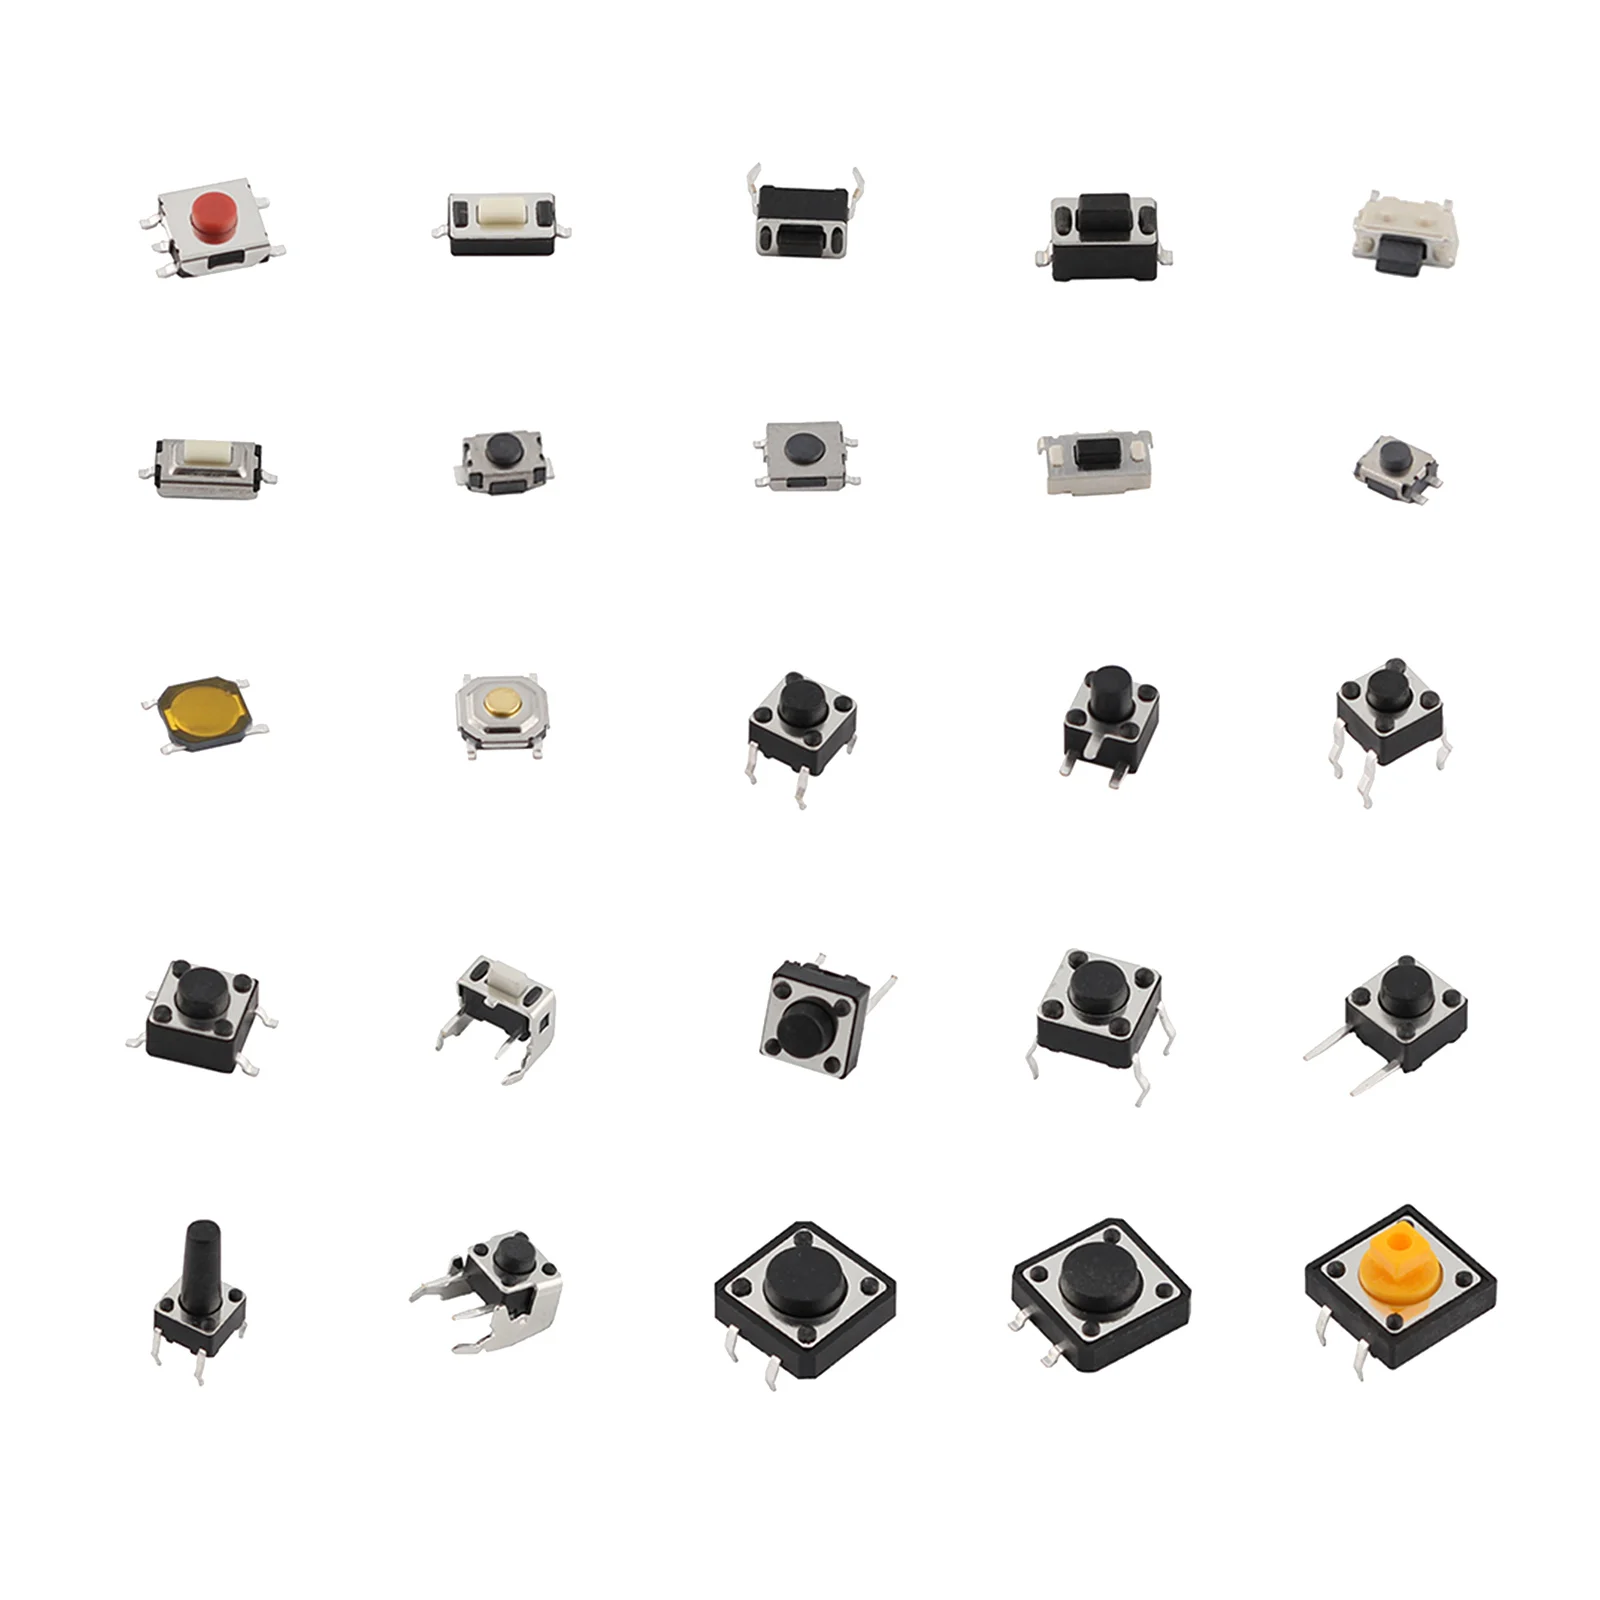 Micro Push Button Assortment Microswitch Kit DIY for TV Electronics Products Audio Equipment Video Recorders